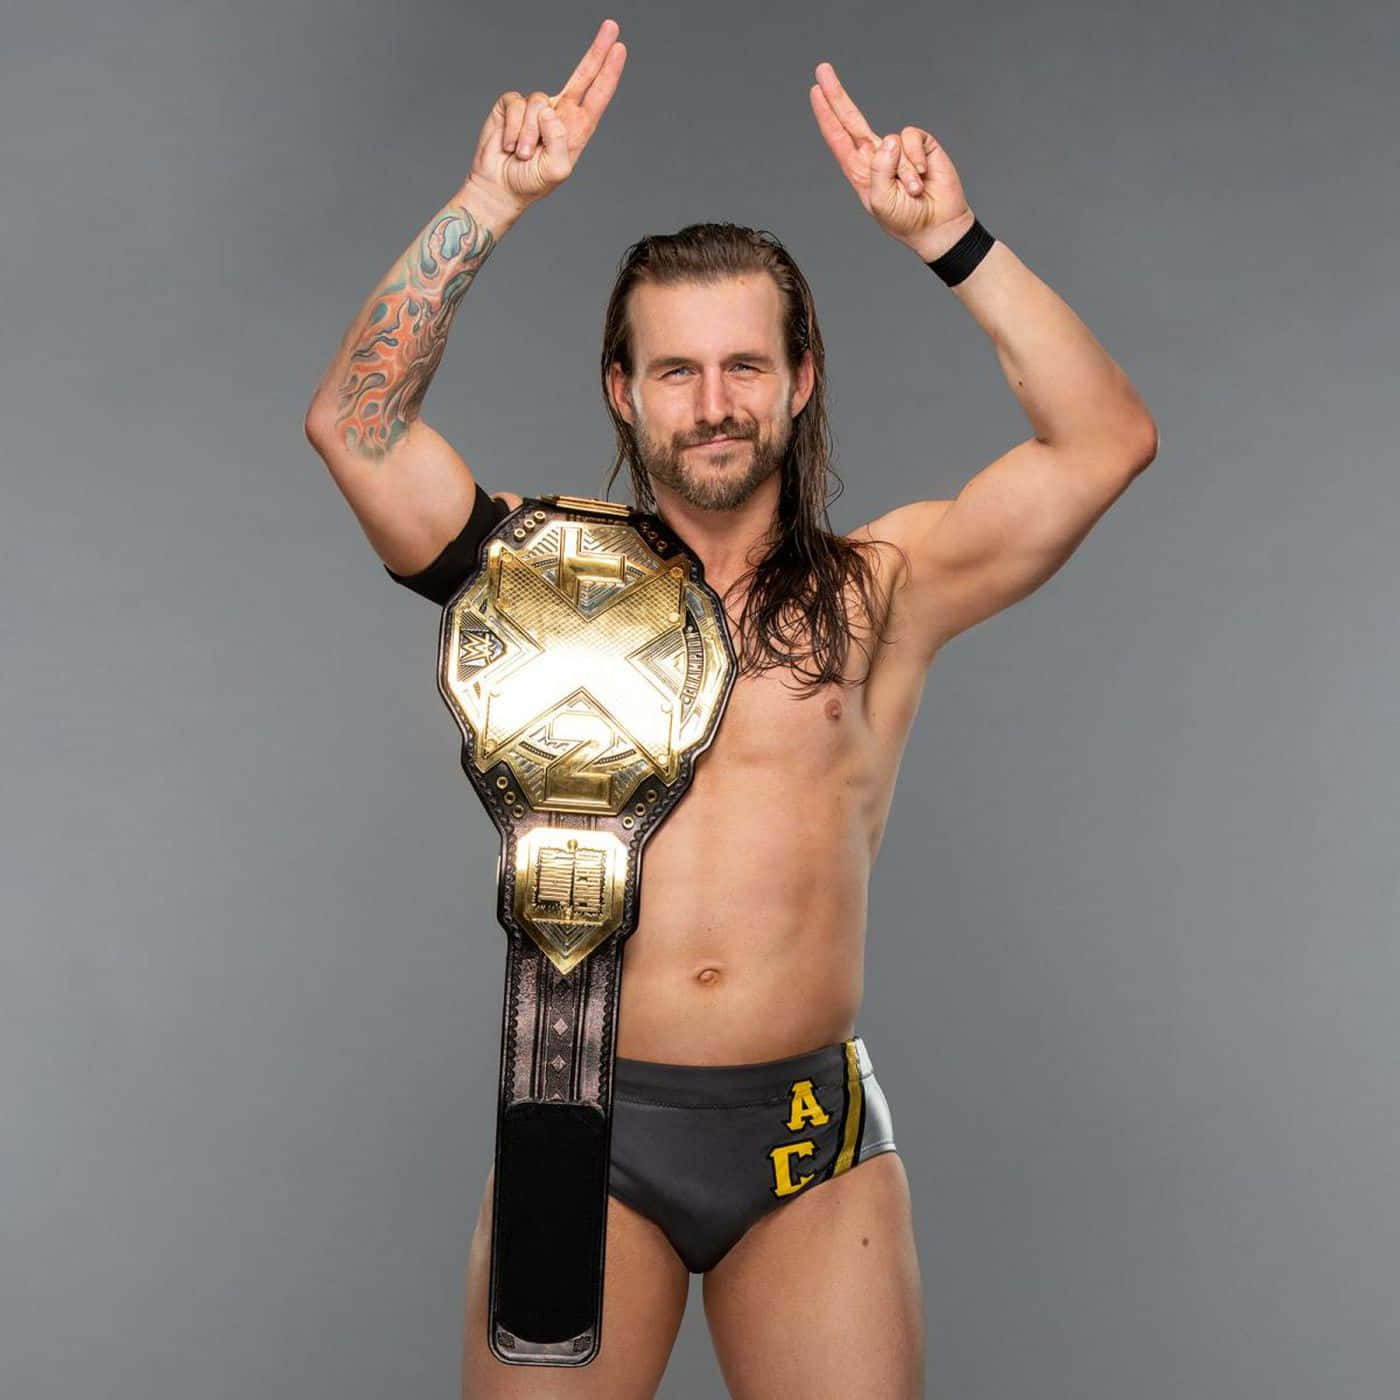 Adamcole Ny Nxt Champion 2019 Wallpaper